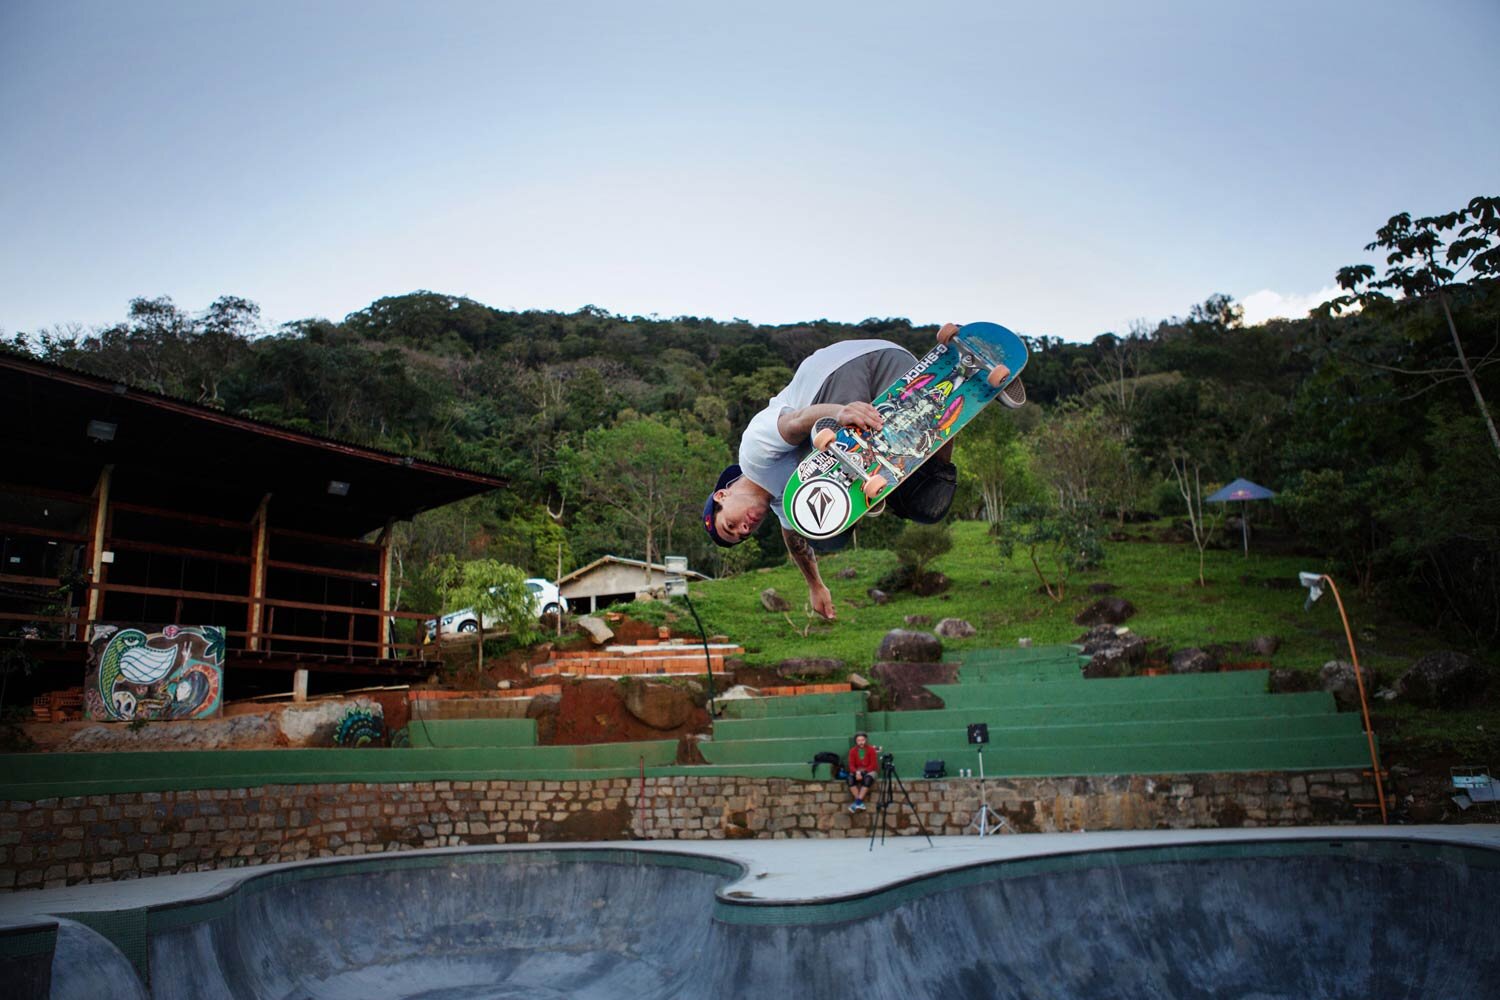 Pedro Barros and the RTMF in Florianopolis, for the Red Bulletin